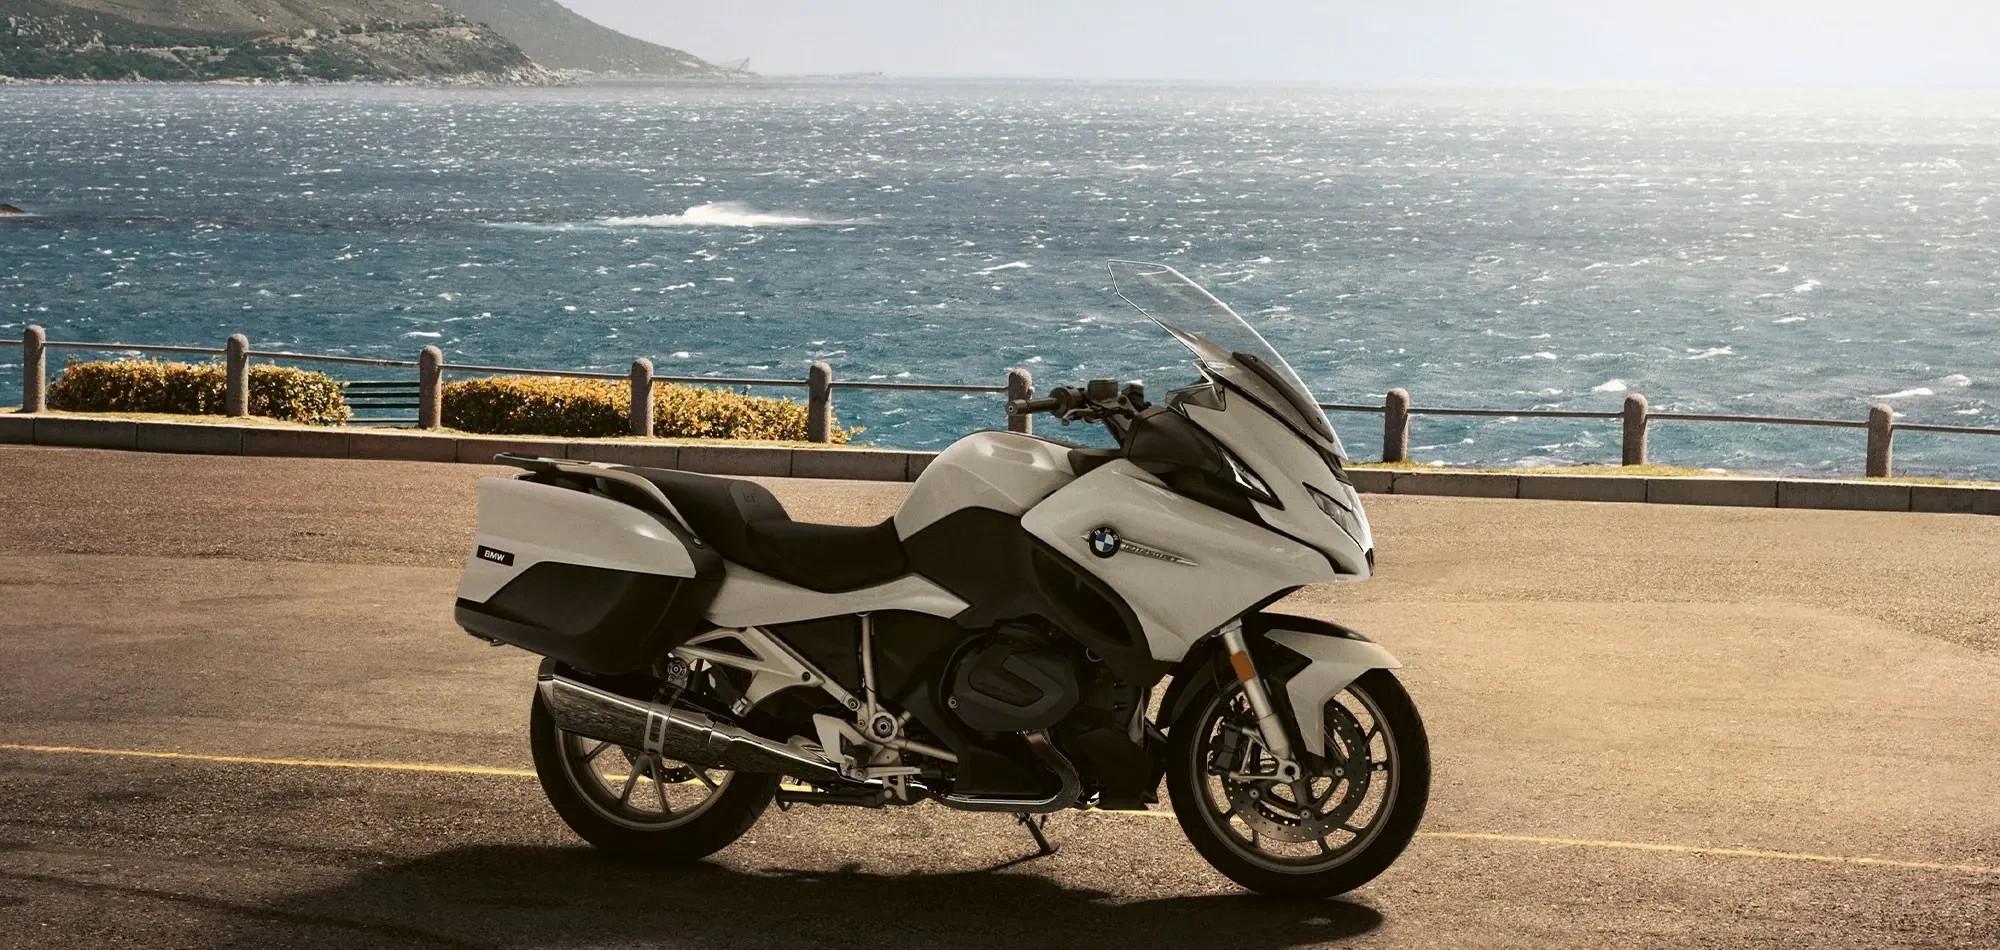 Static image of BMW R 1250 RT touring motorcycle, parked on a mountain road by the sea